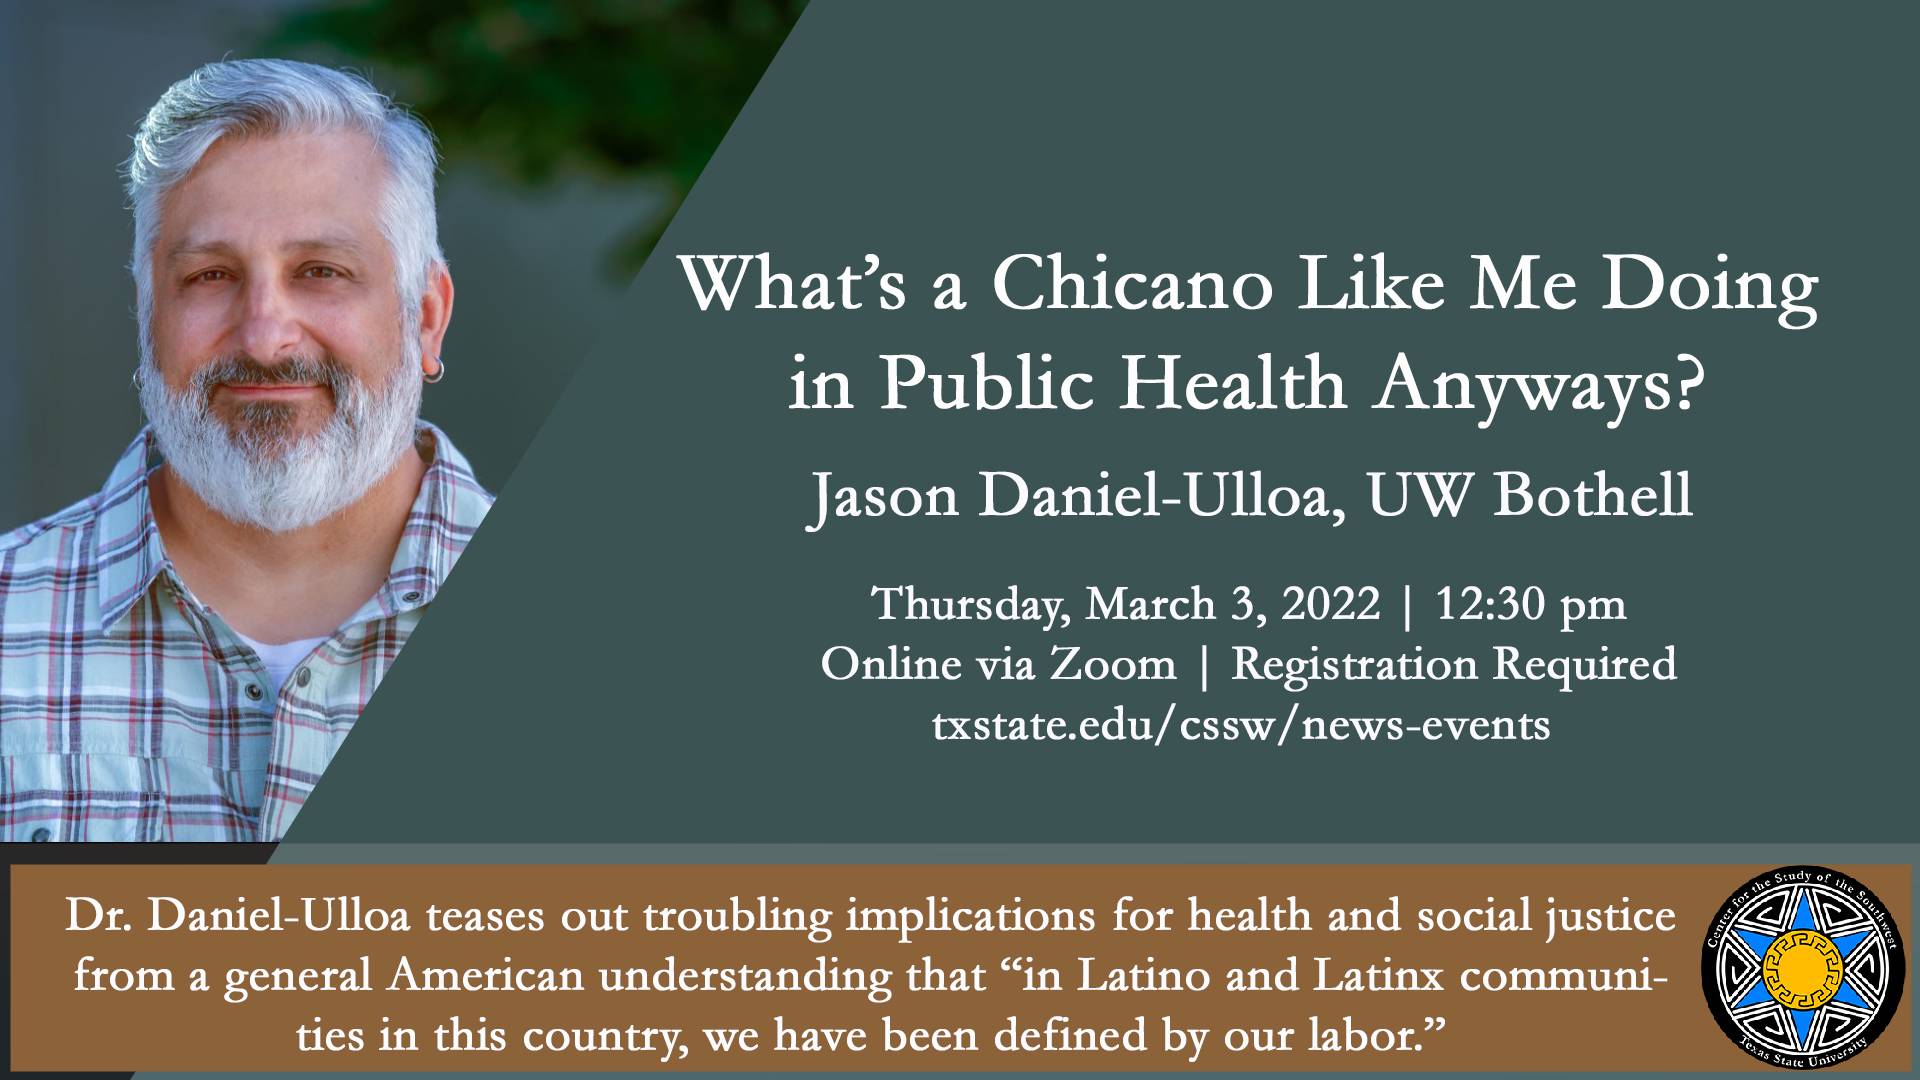 What's a Chicano Like Me Doing in Public Health Anyway?